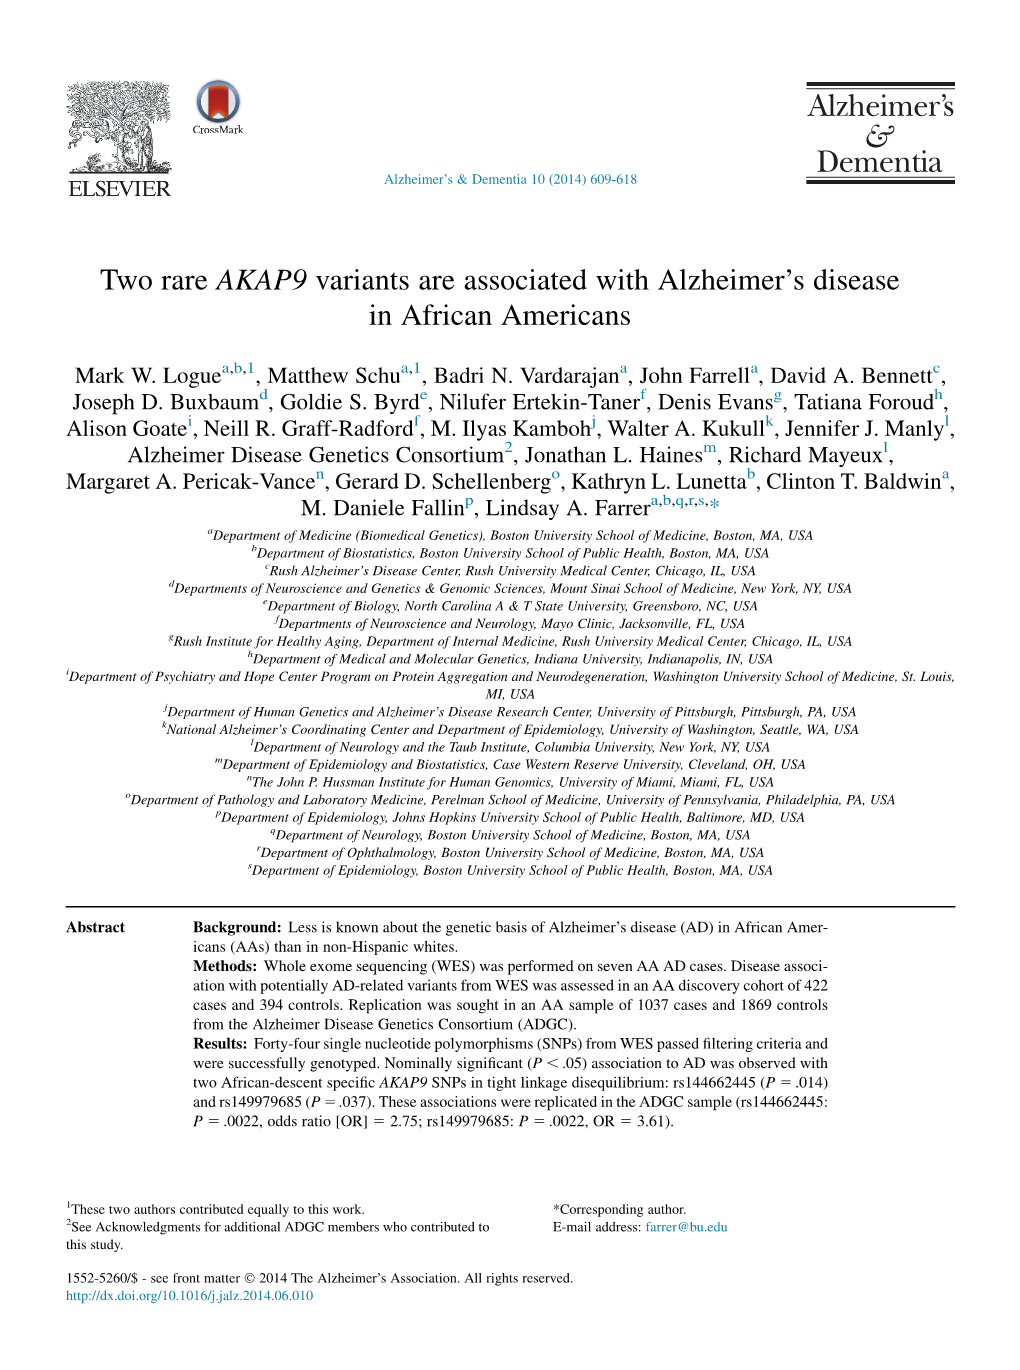 Two Rare AKAP9 Variants Are Associated with Alzheimer's Disease in African Americans